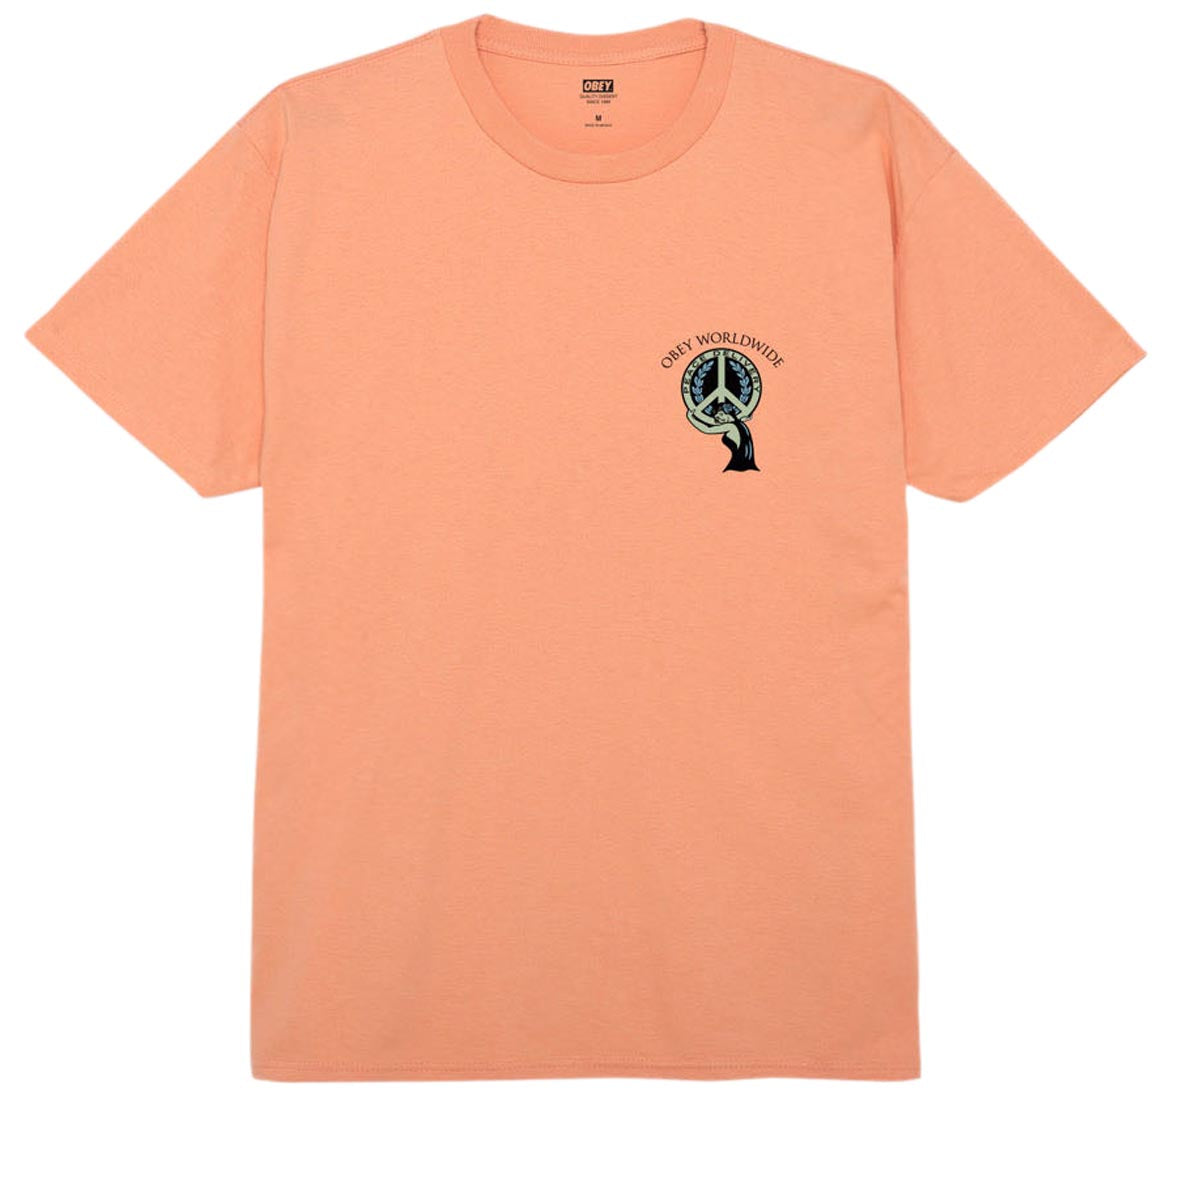 Obey Peace Delivery T-Shirt - Citrus image 2